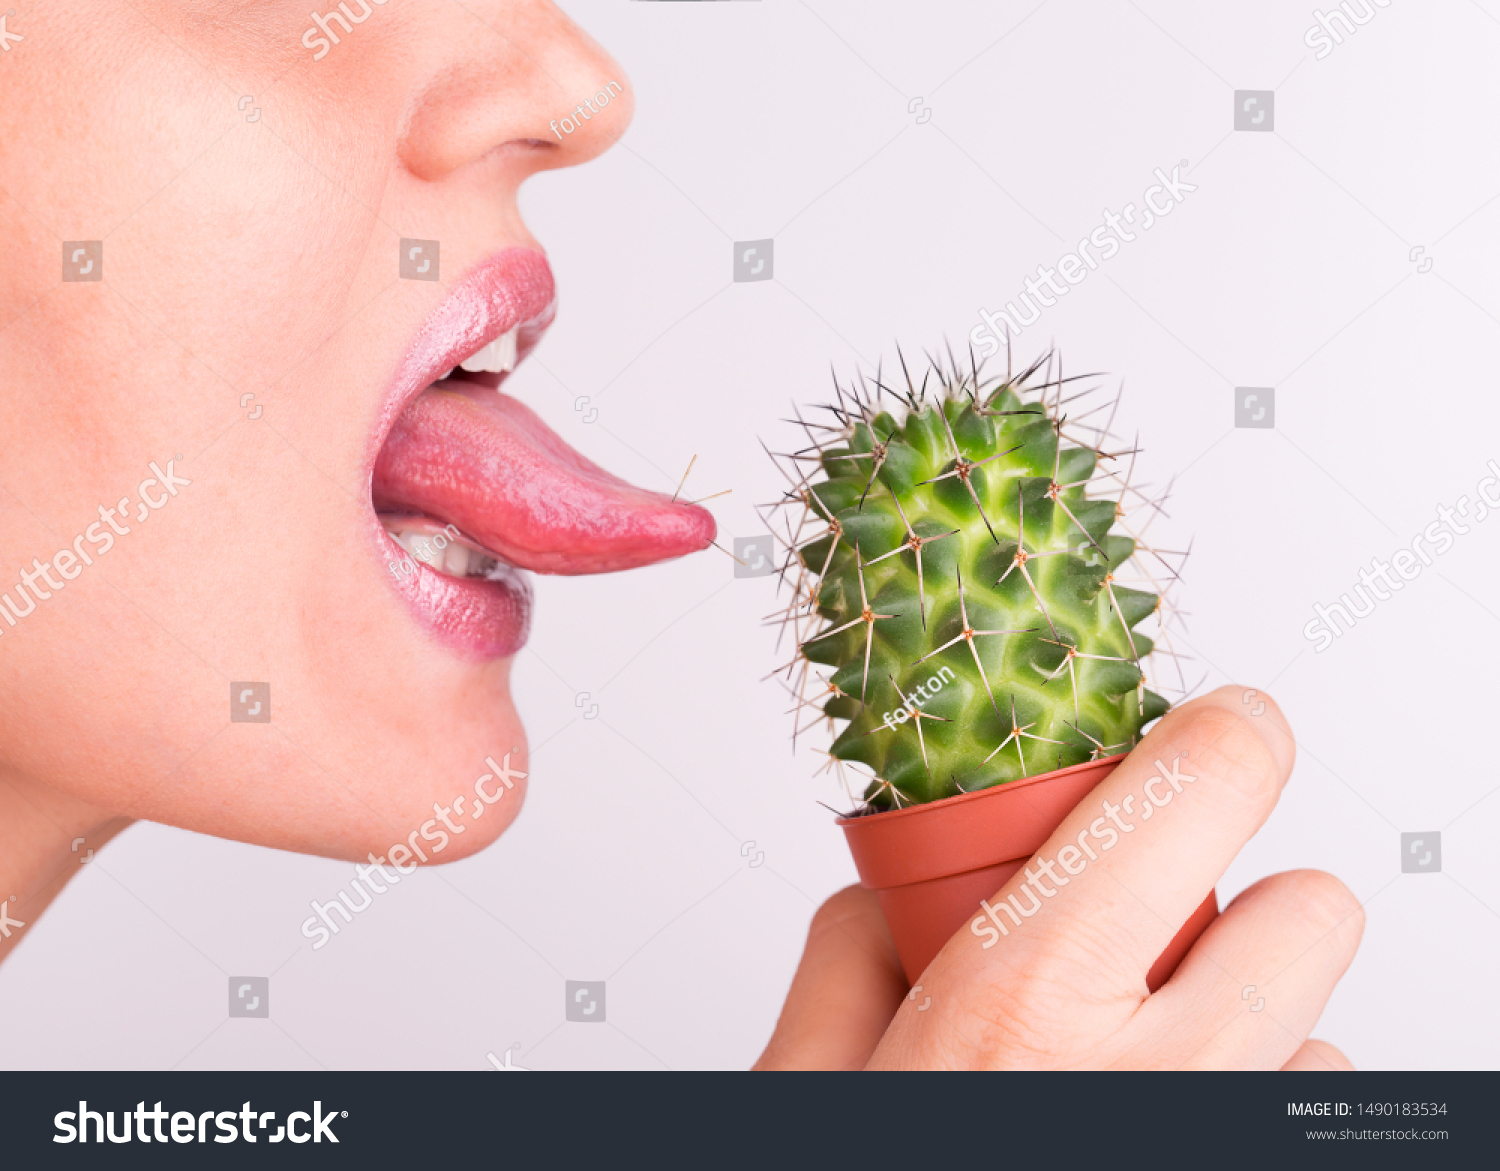 Lick Prickly Cactus Your Tongue Cactus Stock Photo (Edit Now) 1490183534